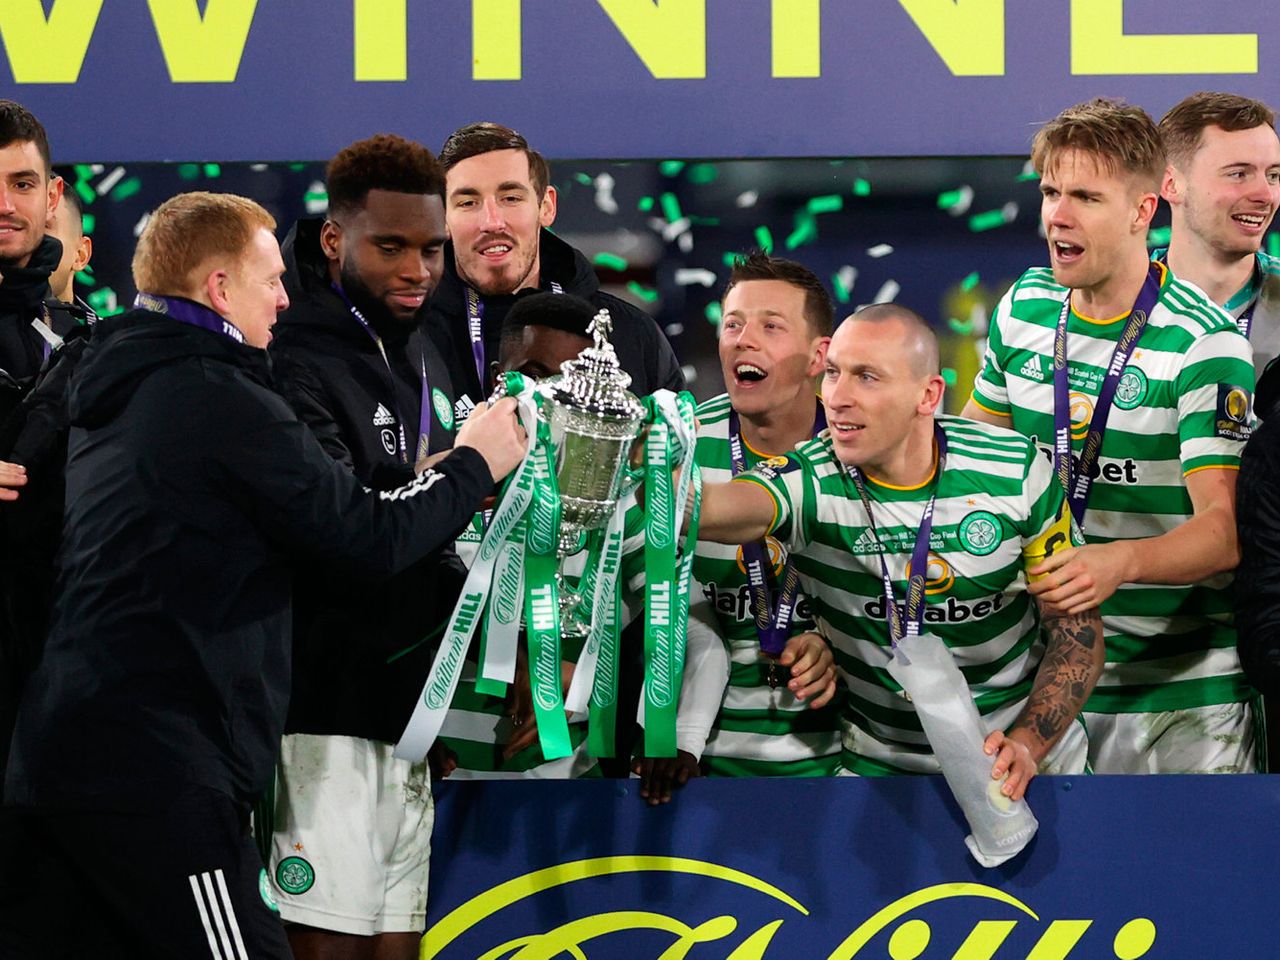 Celtic complete historic quadruple treble with Scottish Cup penalty  shootout win over Hearts